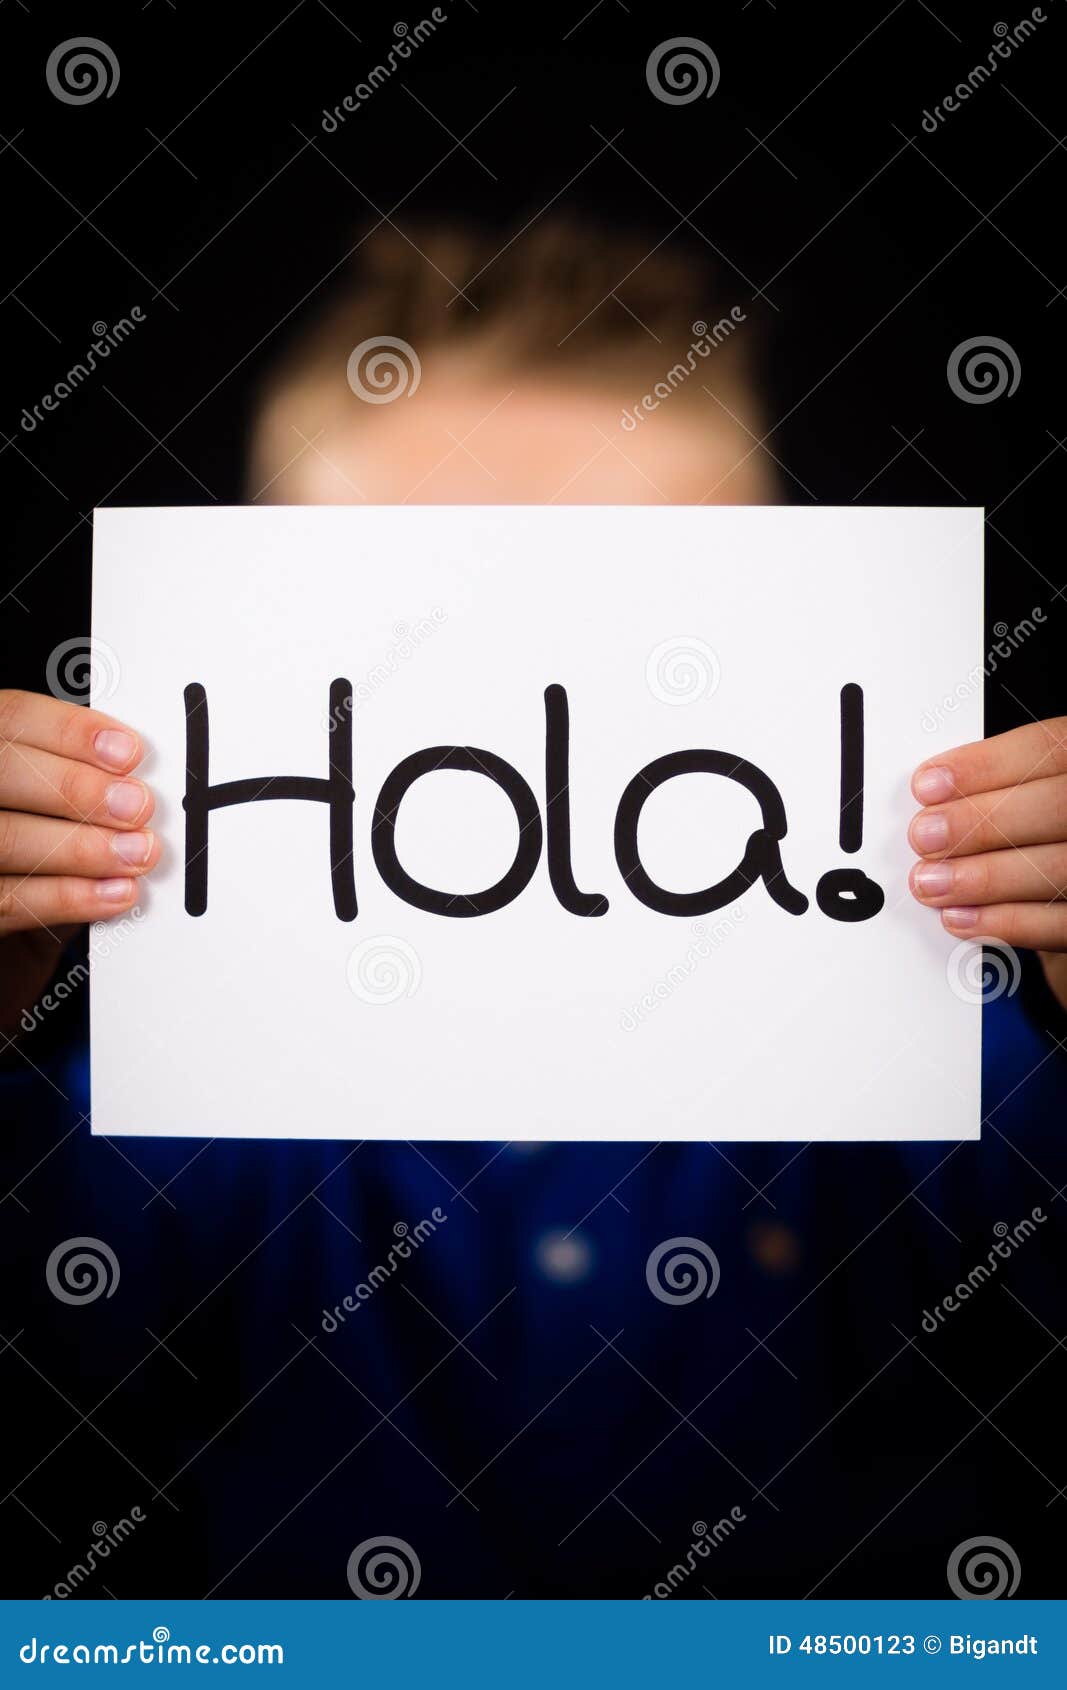 child holding sign with spanish word hola - hello